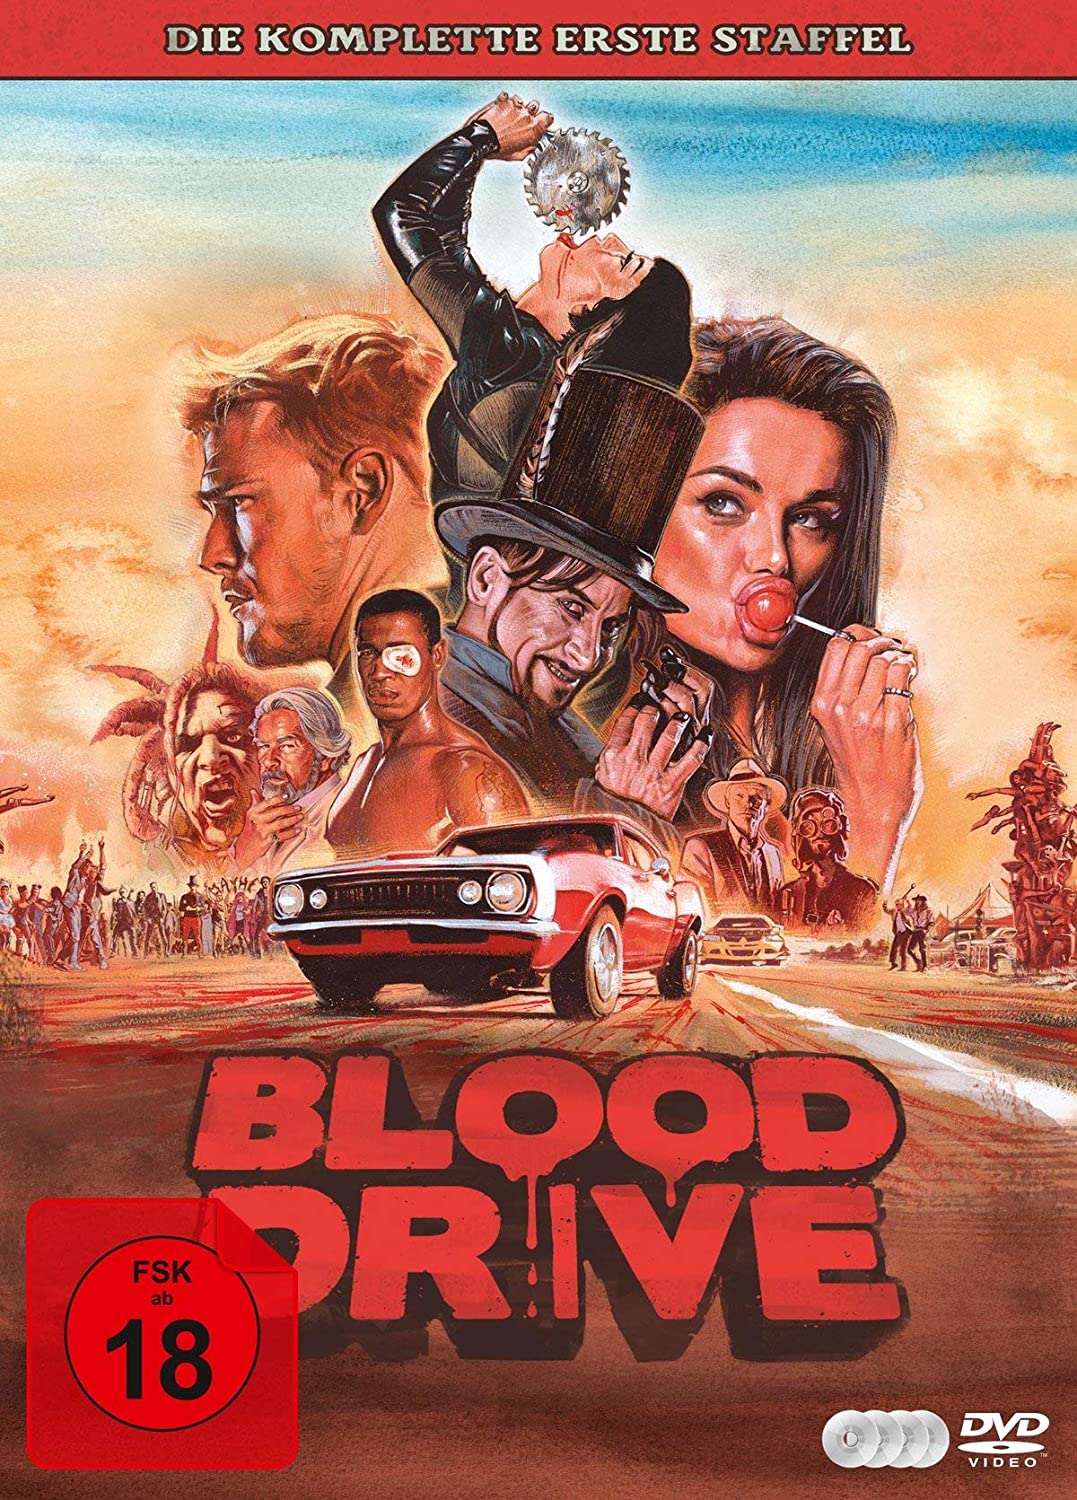 Blood Drive - DVD Cover